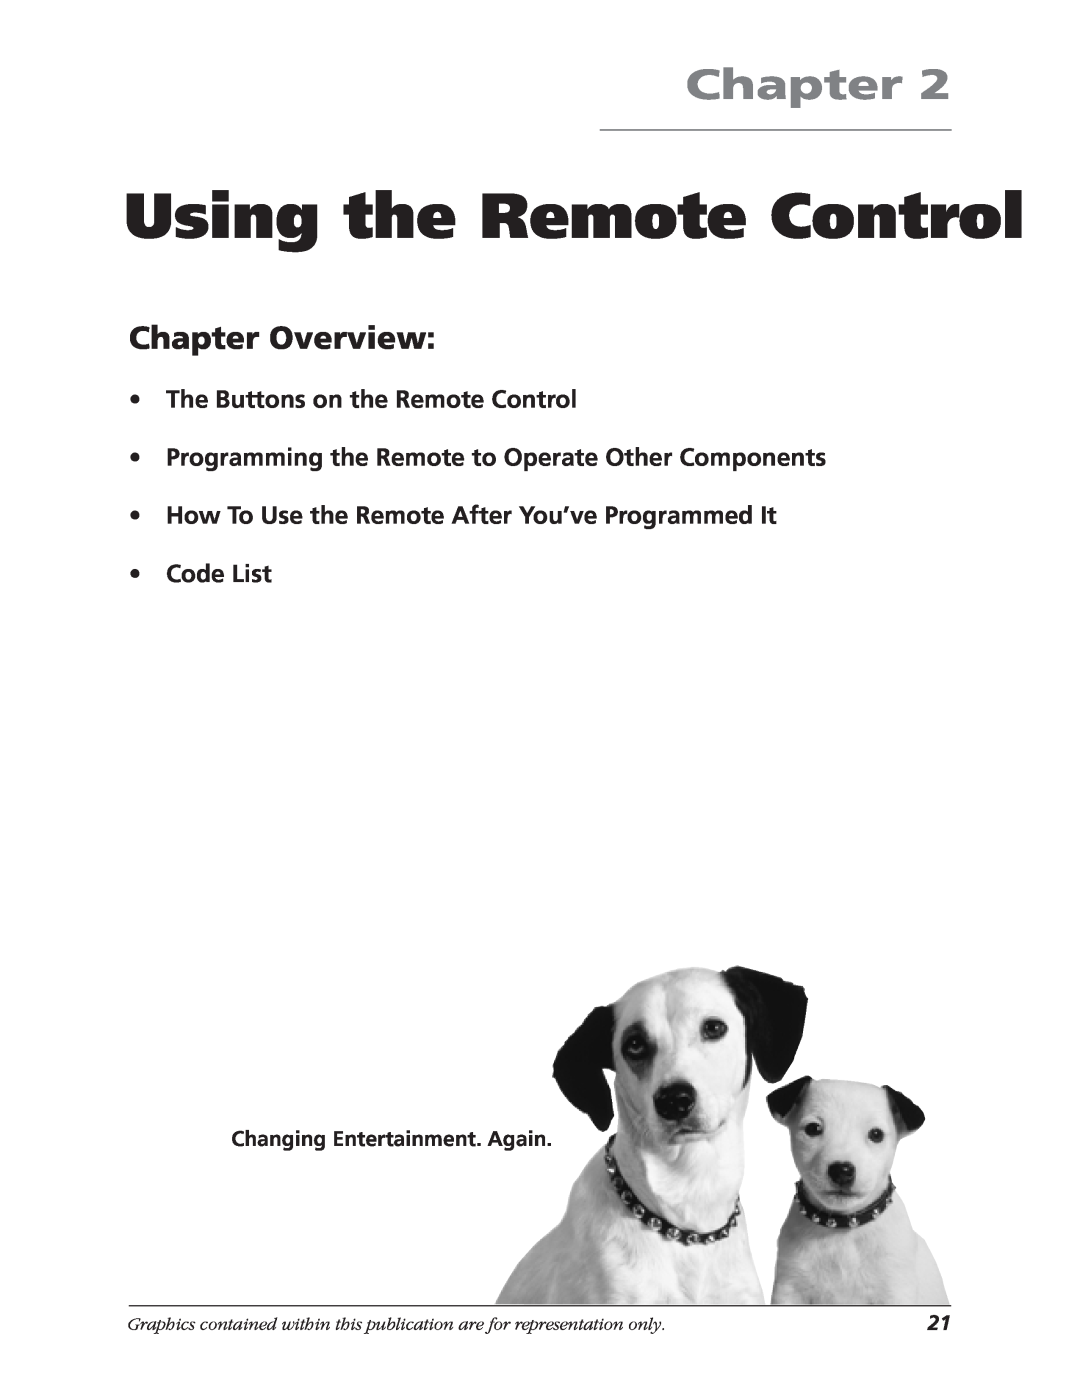 RCA MR68TF700 manual Using the Remote Control, The Buttons on the Remote Control, Chapter Overview 